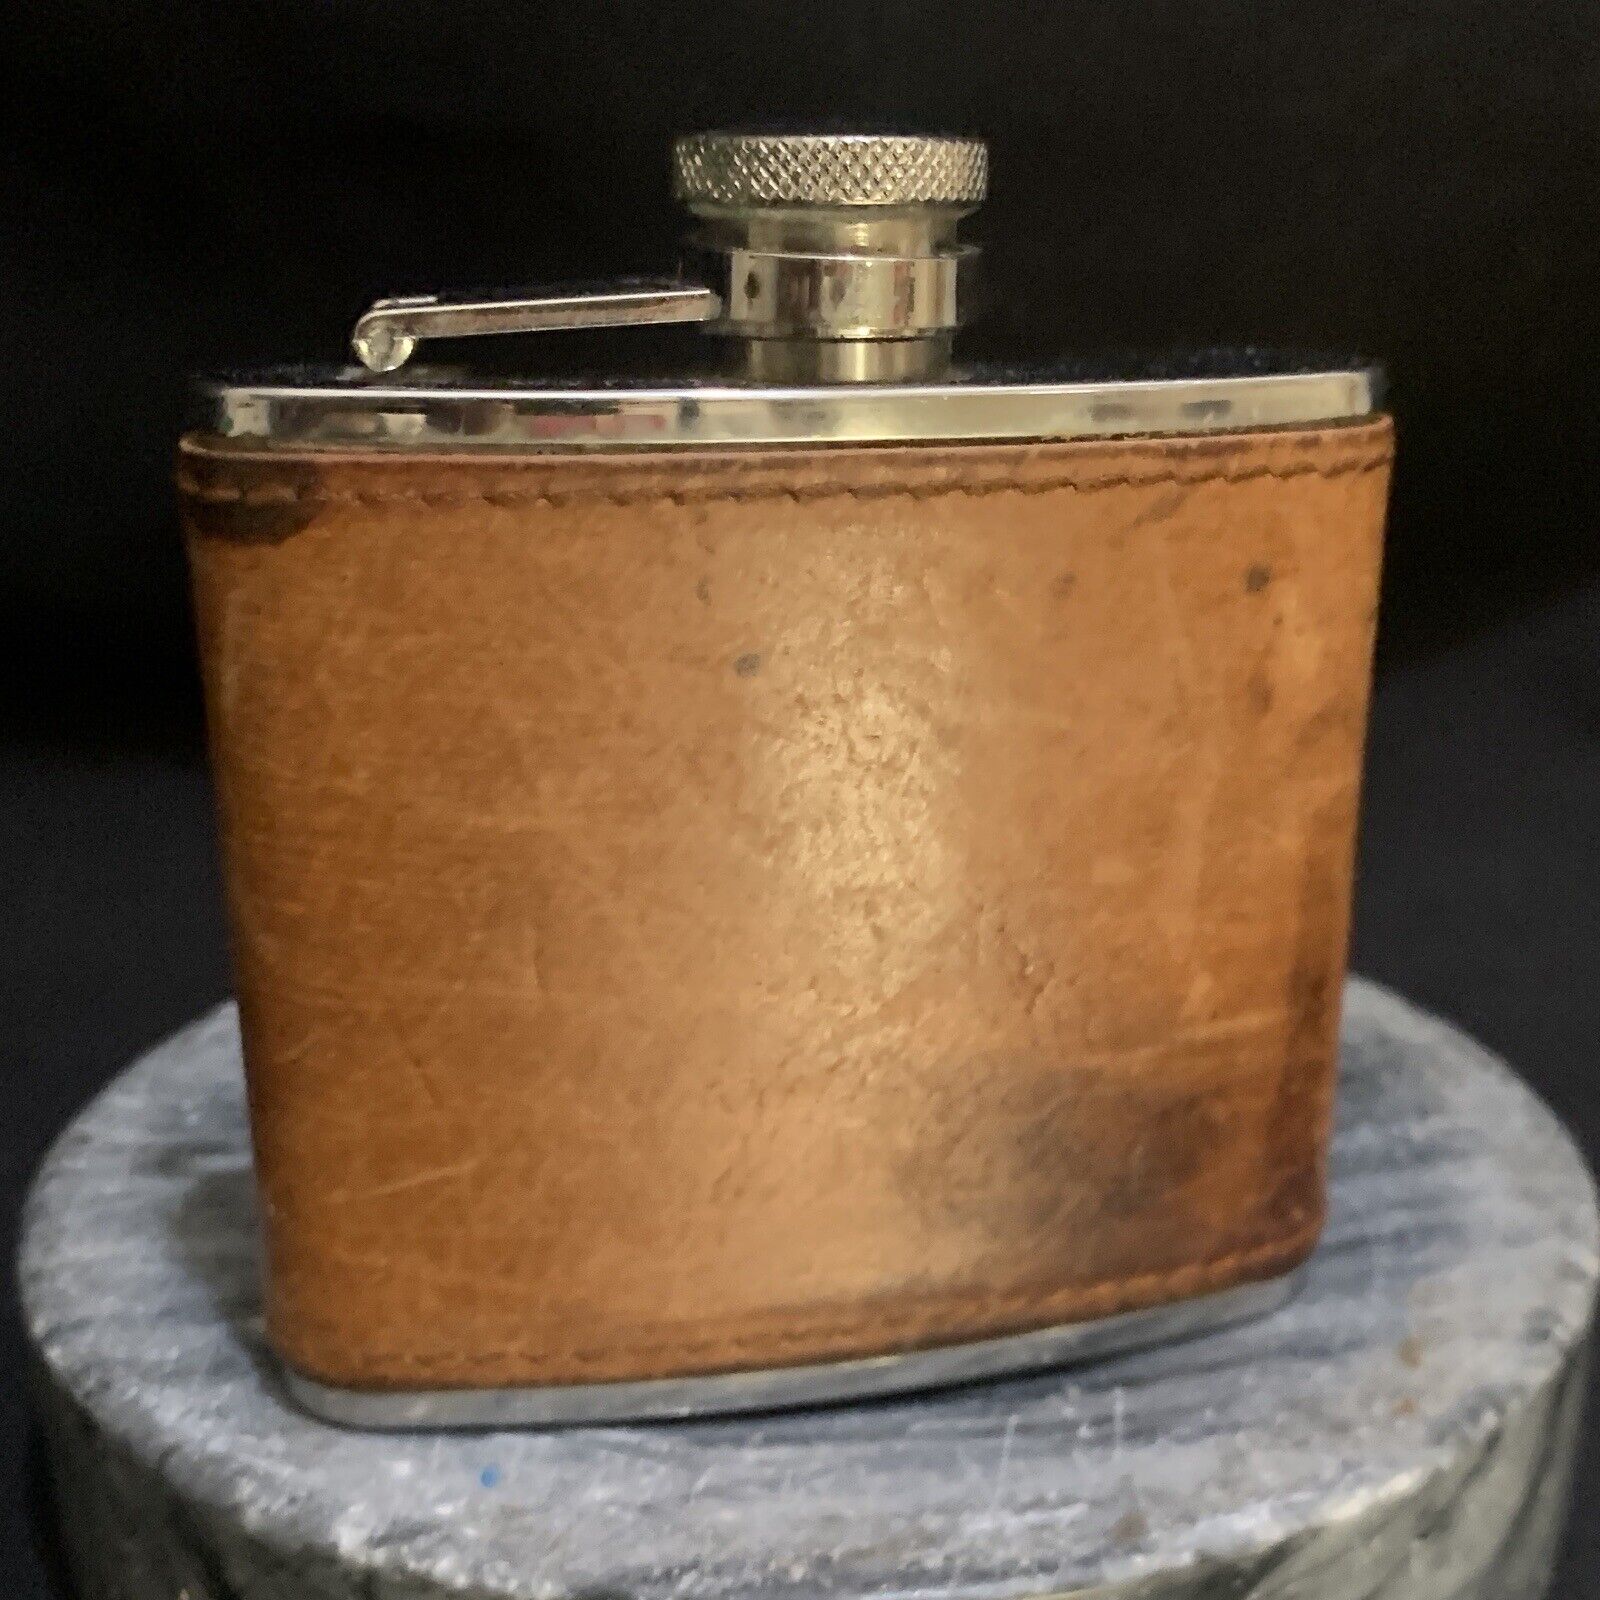 VTG Brown Leather AGED Flask Stainless Steel